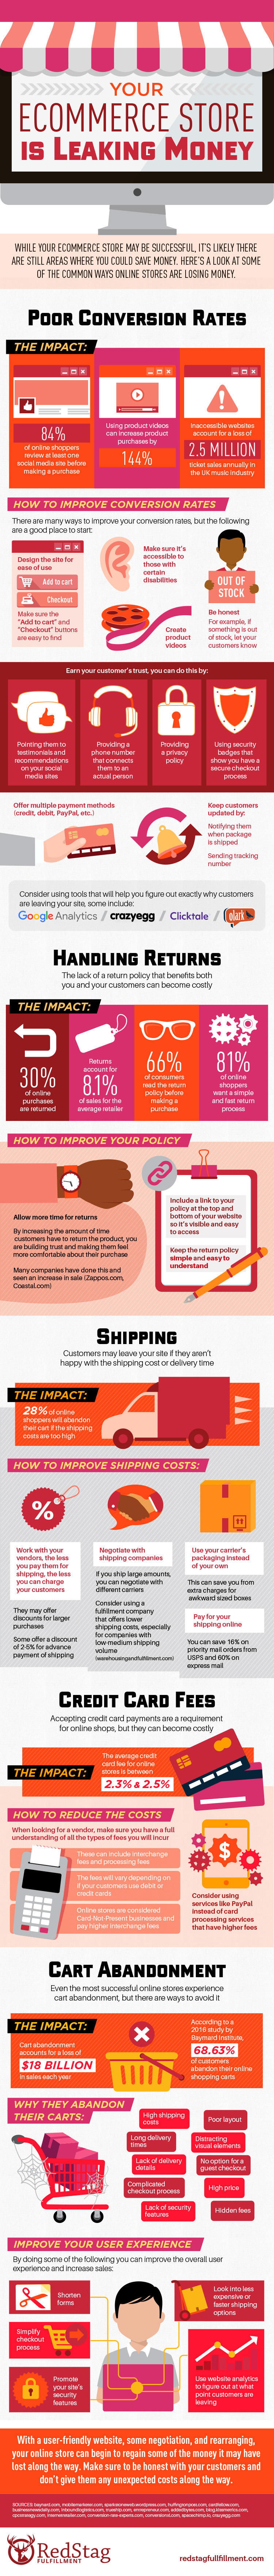 why is your online store loosing money? Infographic